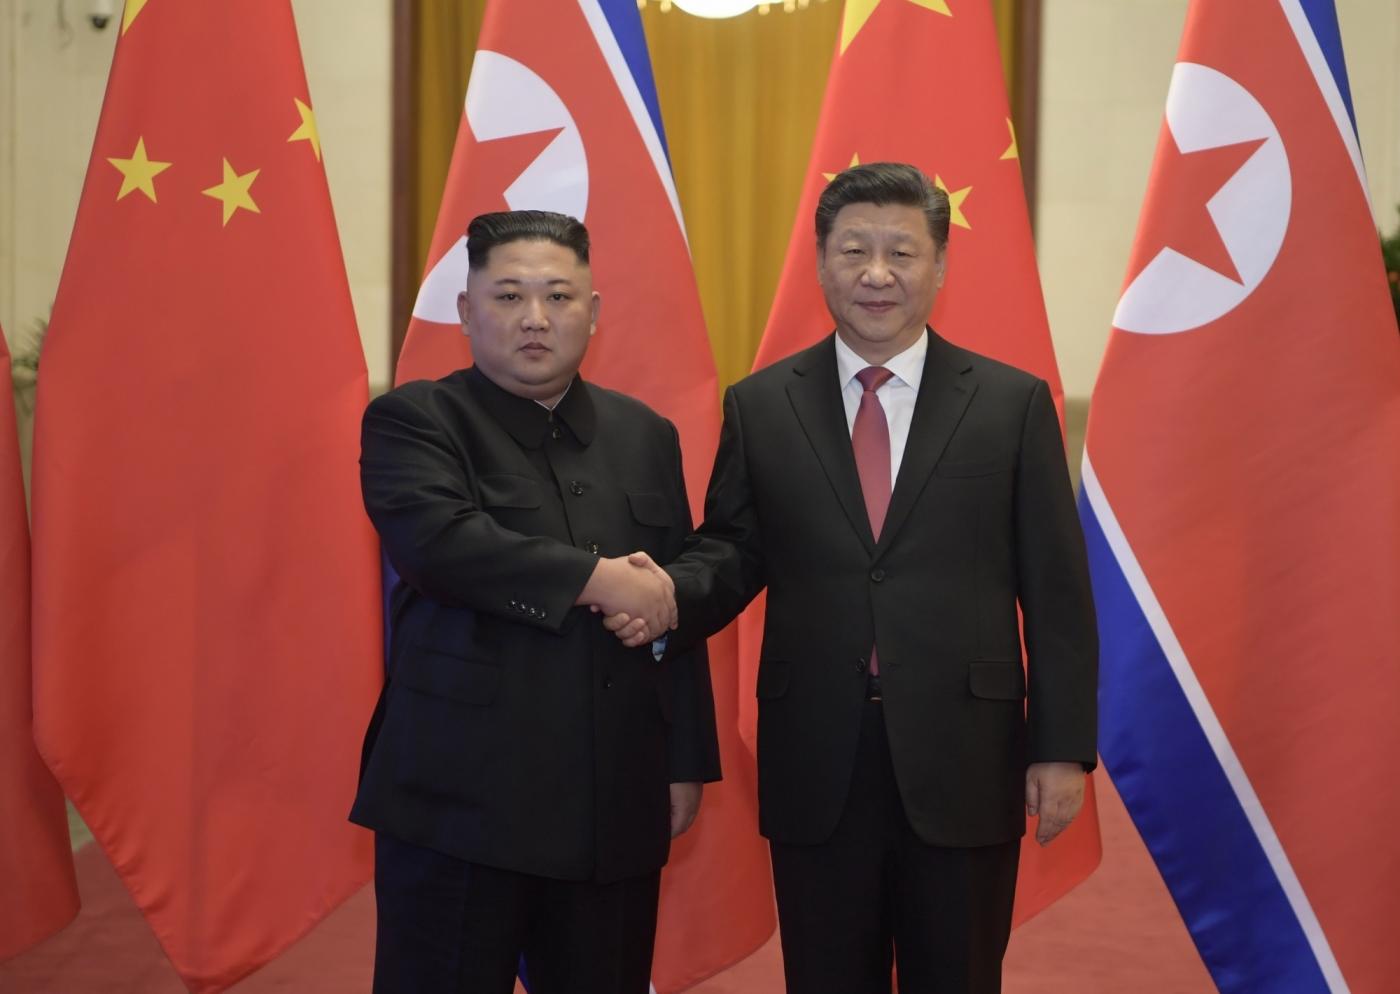 BEIJING, Jan. 10, 2019 (Xinhua) -- Xi Jinping (R), general secretary of the Central Committee of the Communist Party of China and Chinese president, holds a welcoming ceremony for Kim Jong Un, chairman of the Workers' Party of Korea and chairman of the State Affairs Commission of the Democratic People's Republic of Korea, before their talks at the Great Hall of the People in Beijing, capital of China, Jan. 8, 2019. Xi Jinping on Tuesday held talks with Kim Jong Un, who arrived in Beijing on the same day for a visit to China. (Xinhua/Li Xueren/IANS) by .